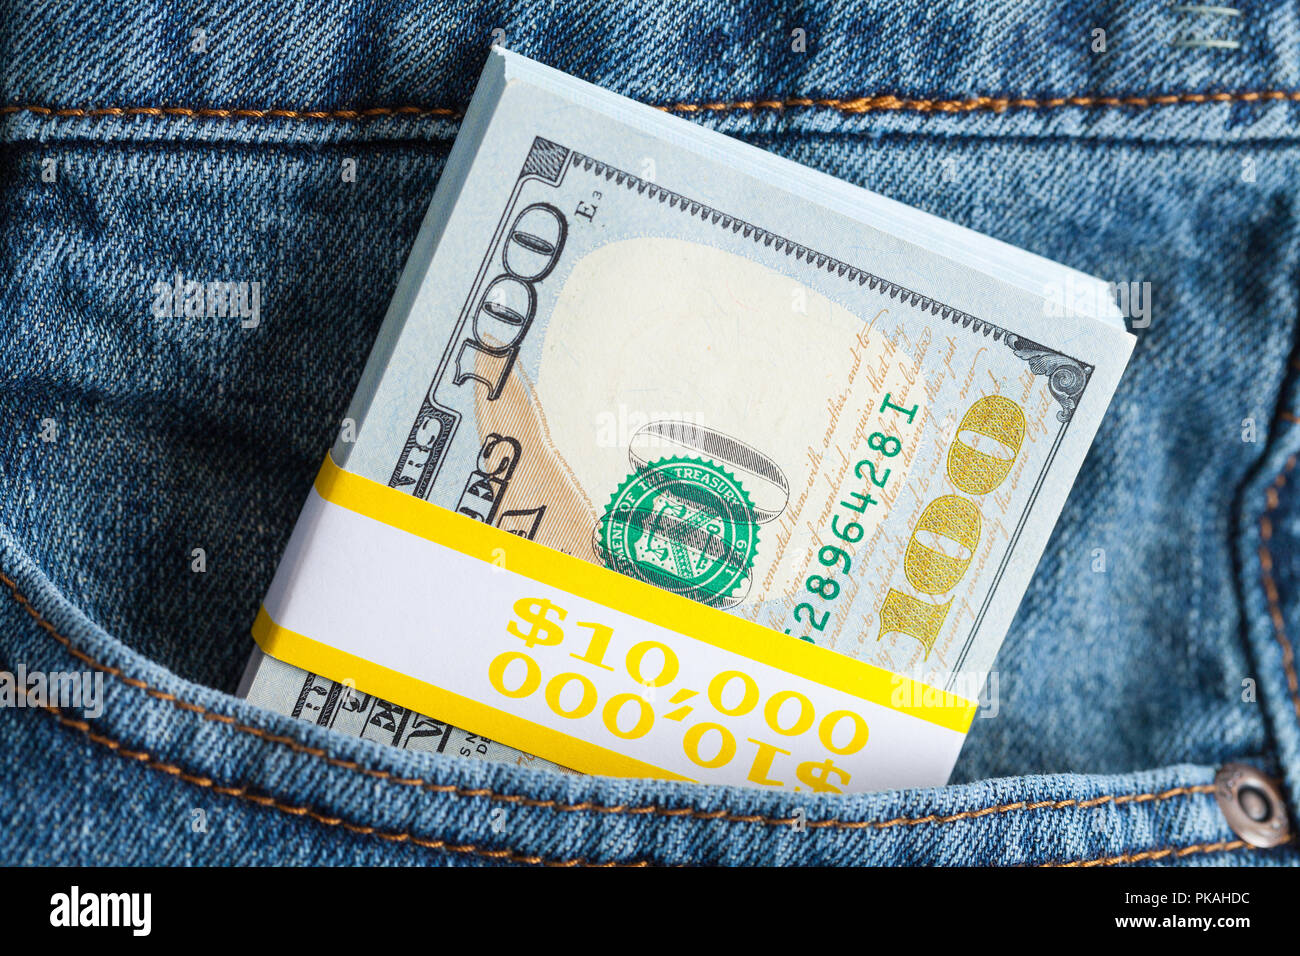 Stack of Cash Stuffed in Blue Jeans. Stock Photo